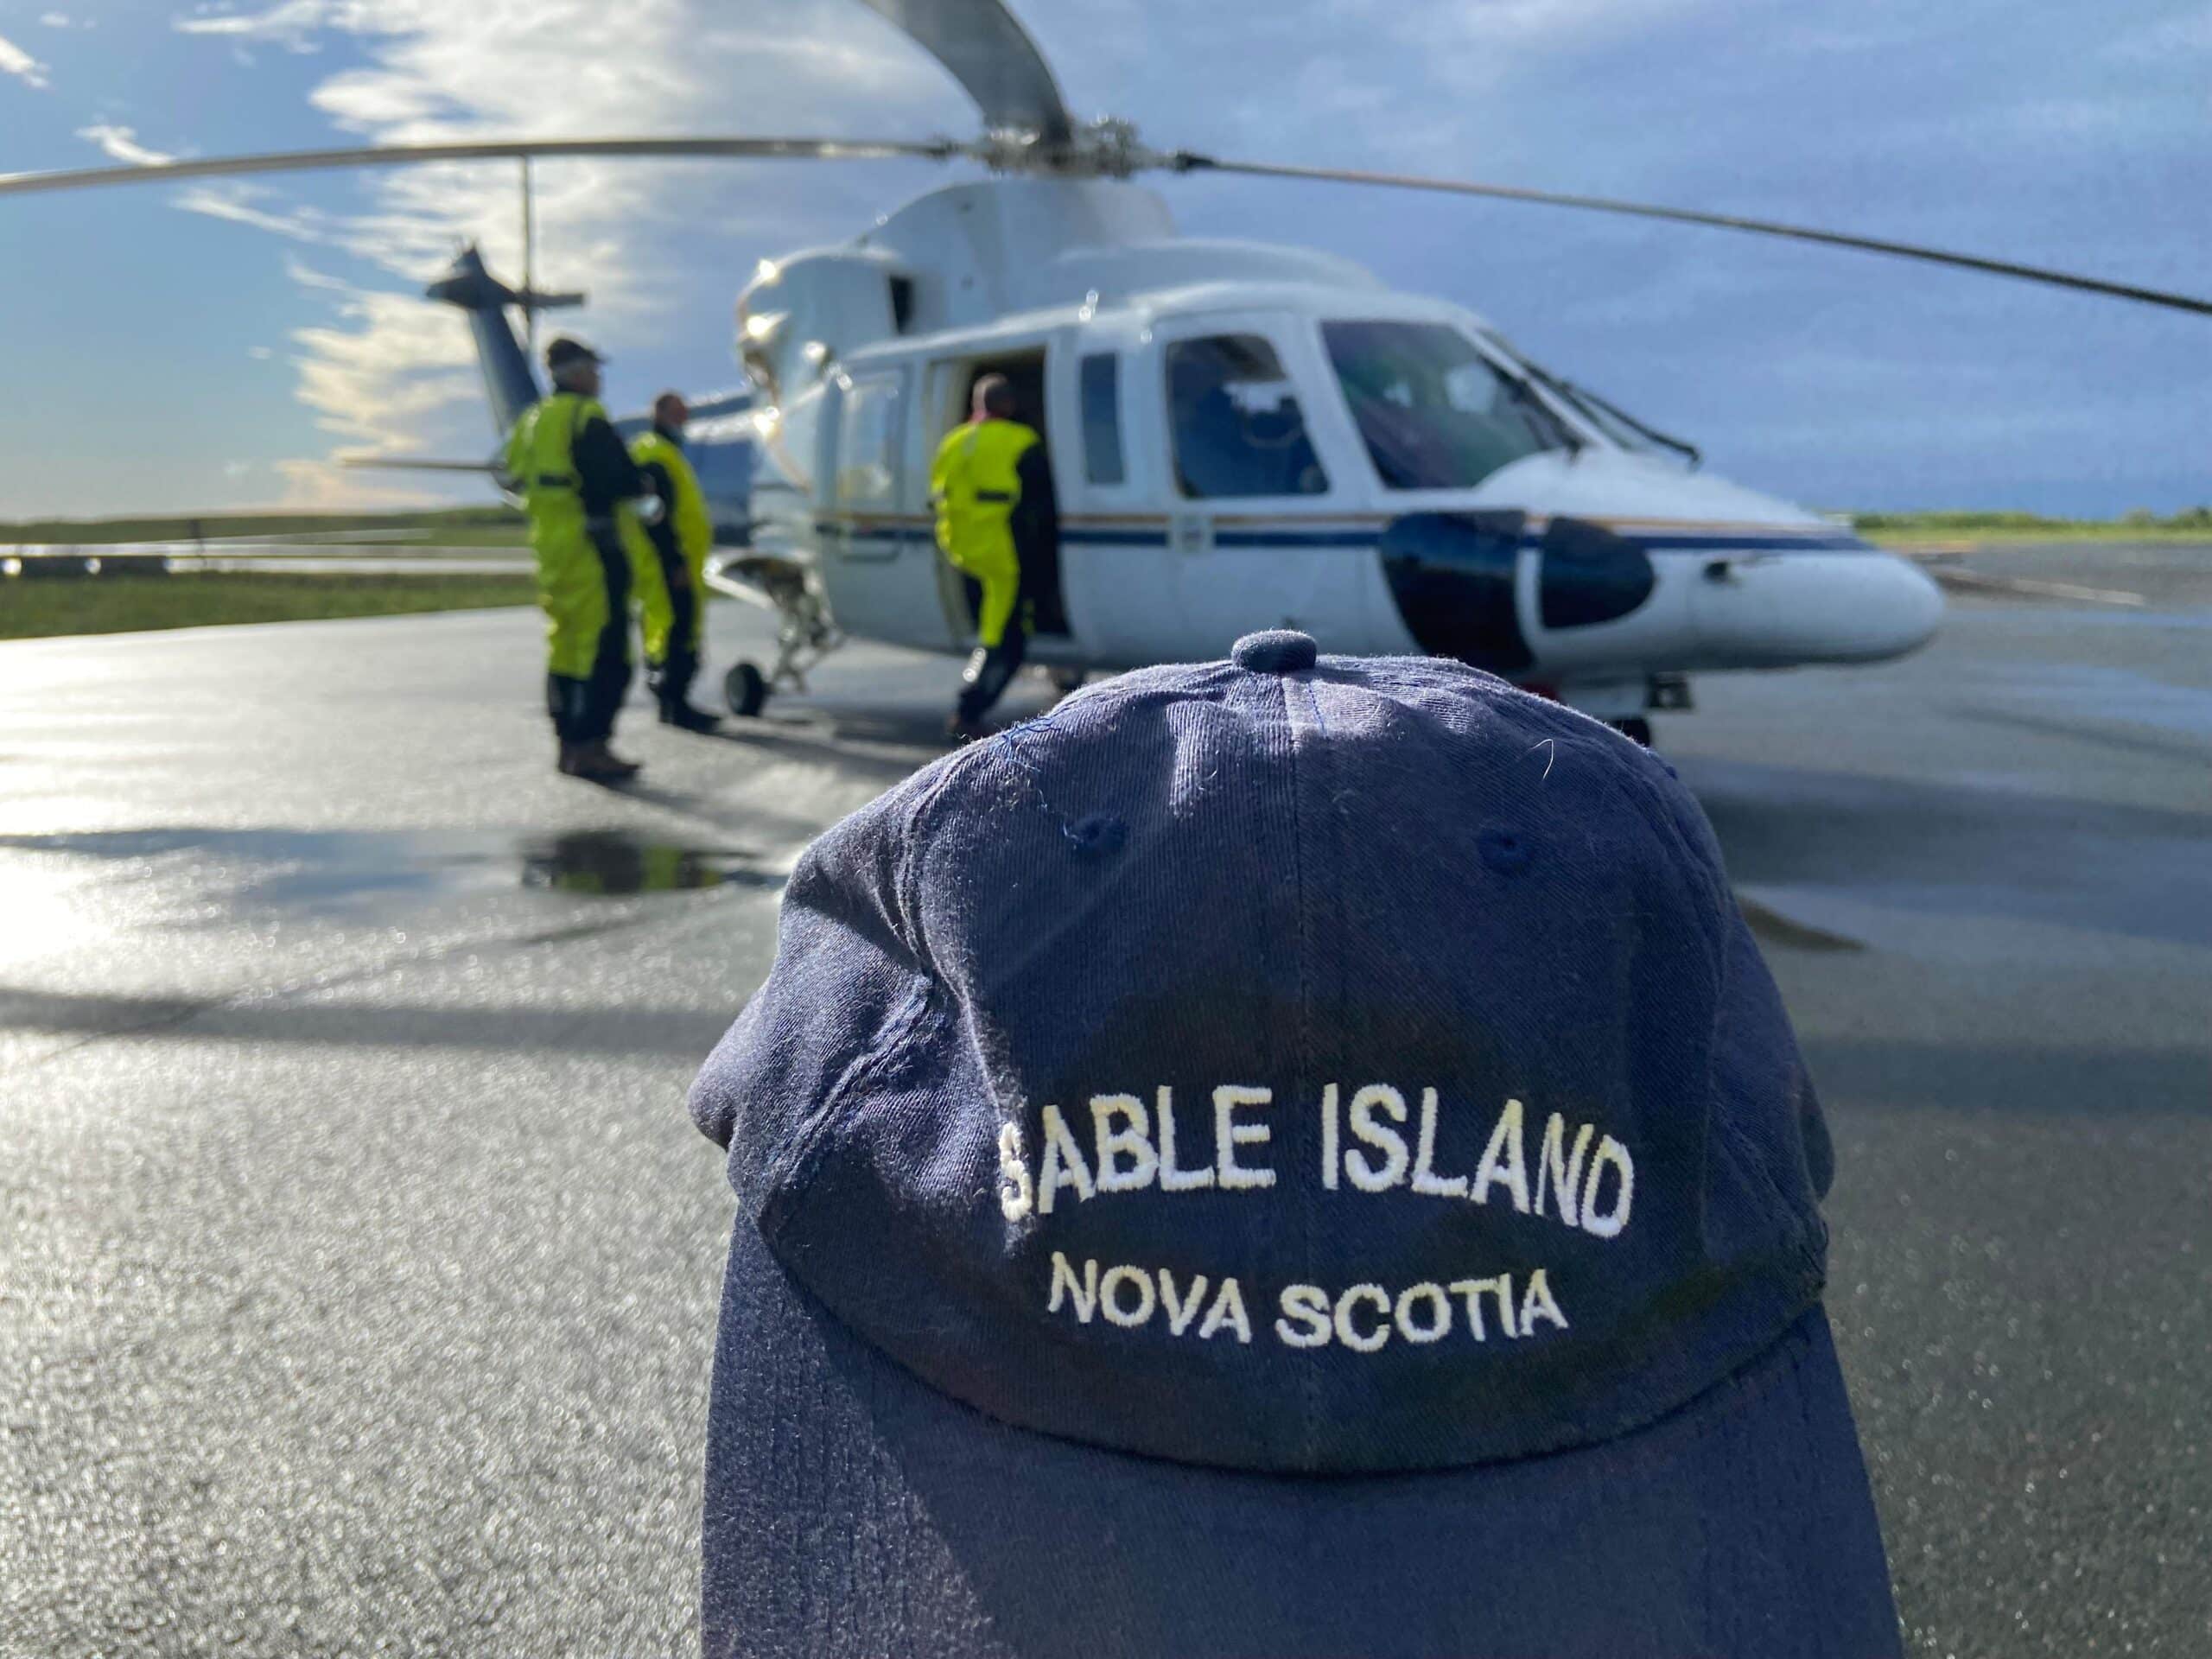 Helicopter ride to sable island. A photo of a baseball-style hat with the words Sable Island Nova Scotia on it in front of a helicopter that had recently landed on the island